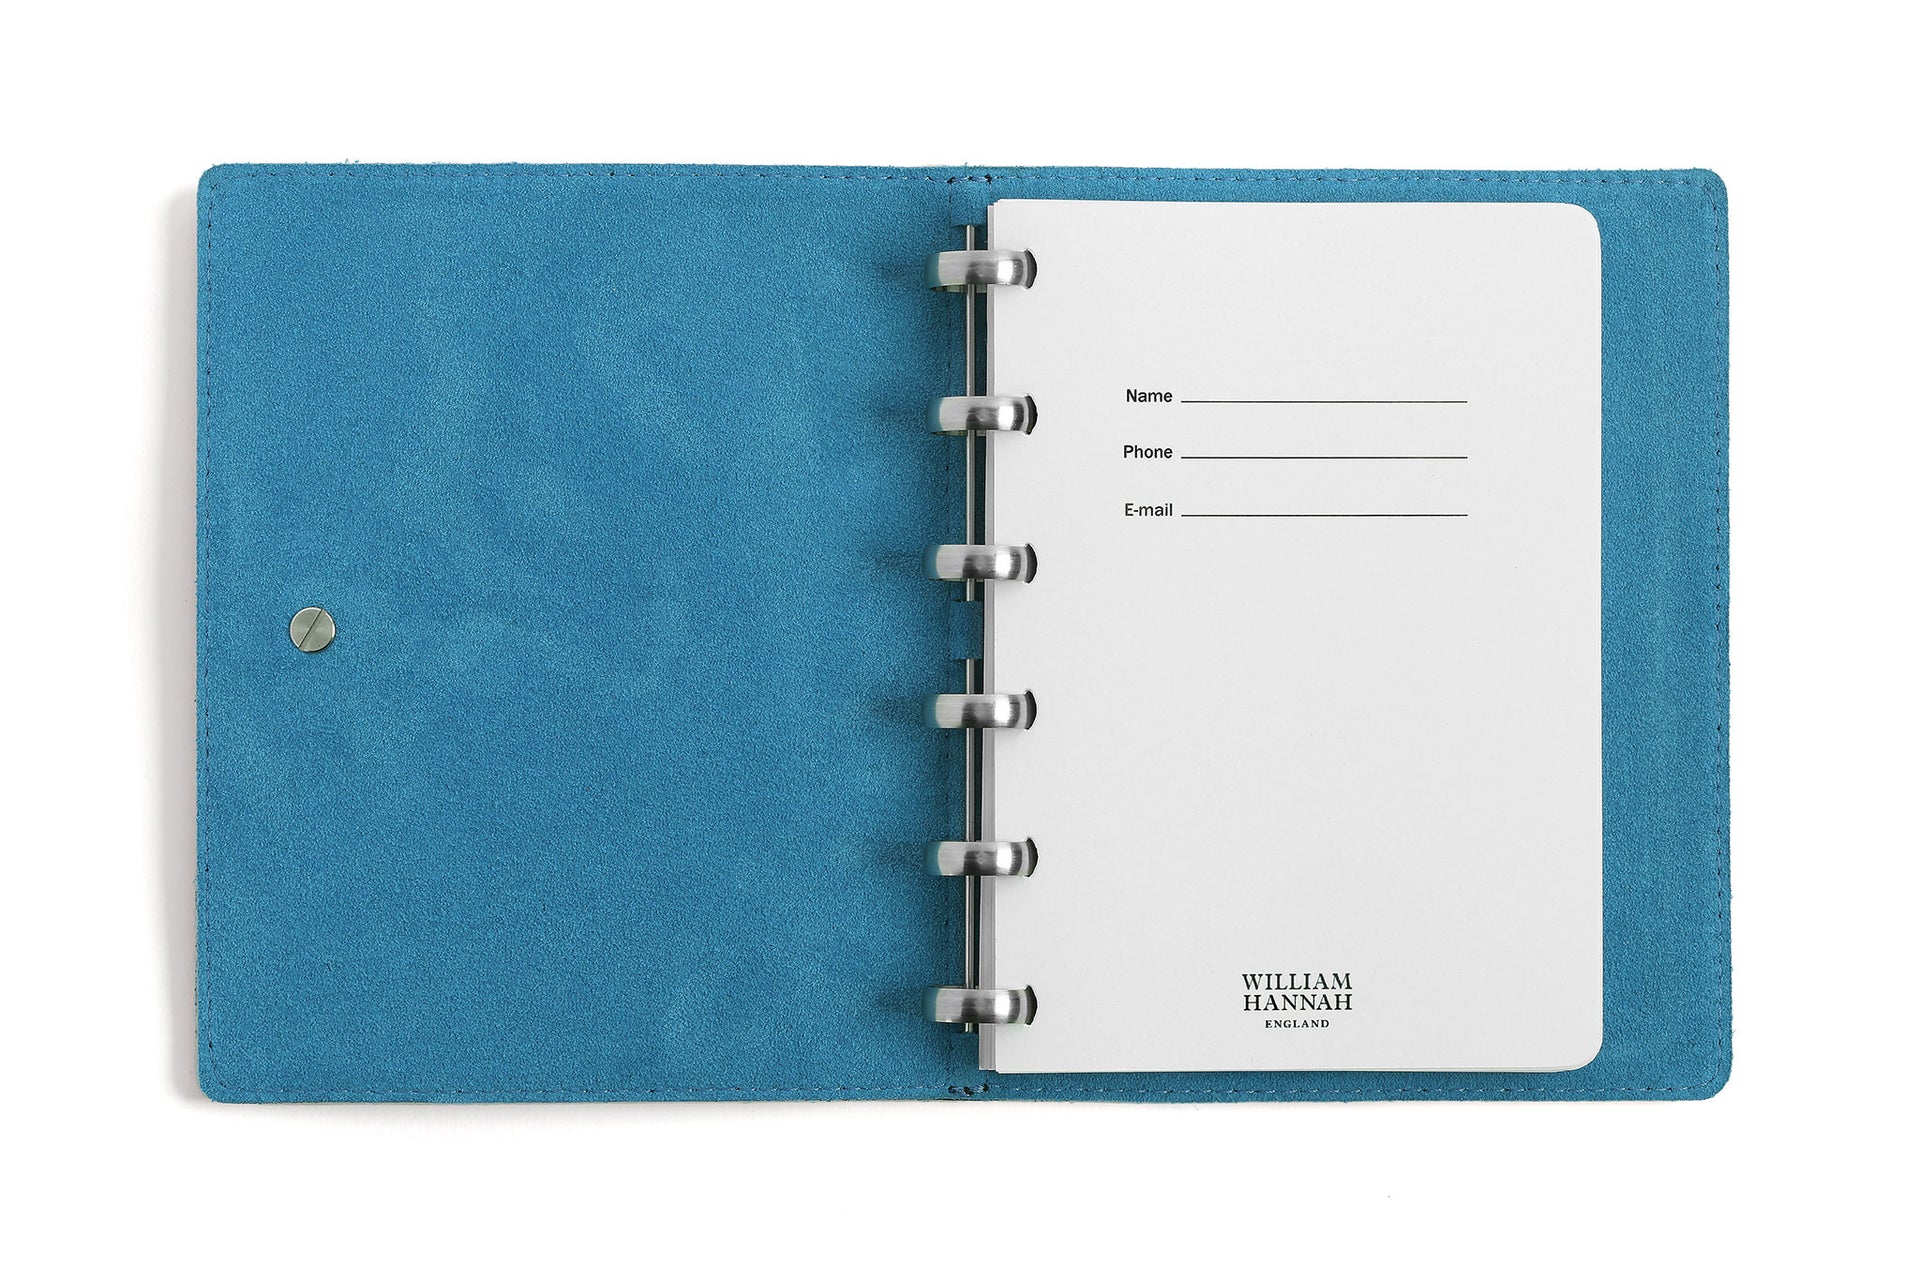 William Hannah tan leather and light blue suede A6 notebook: inside